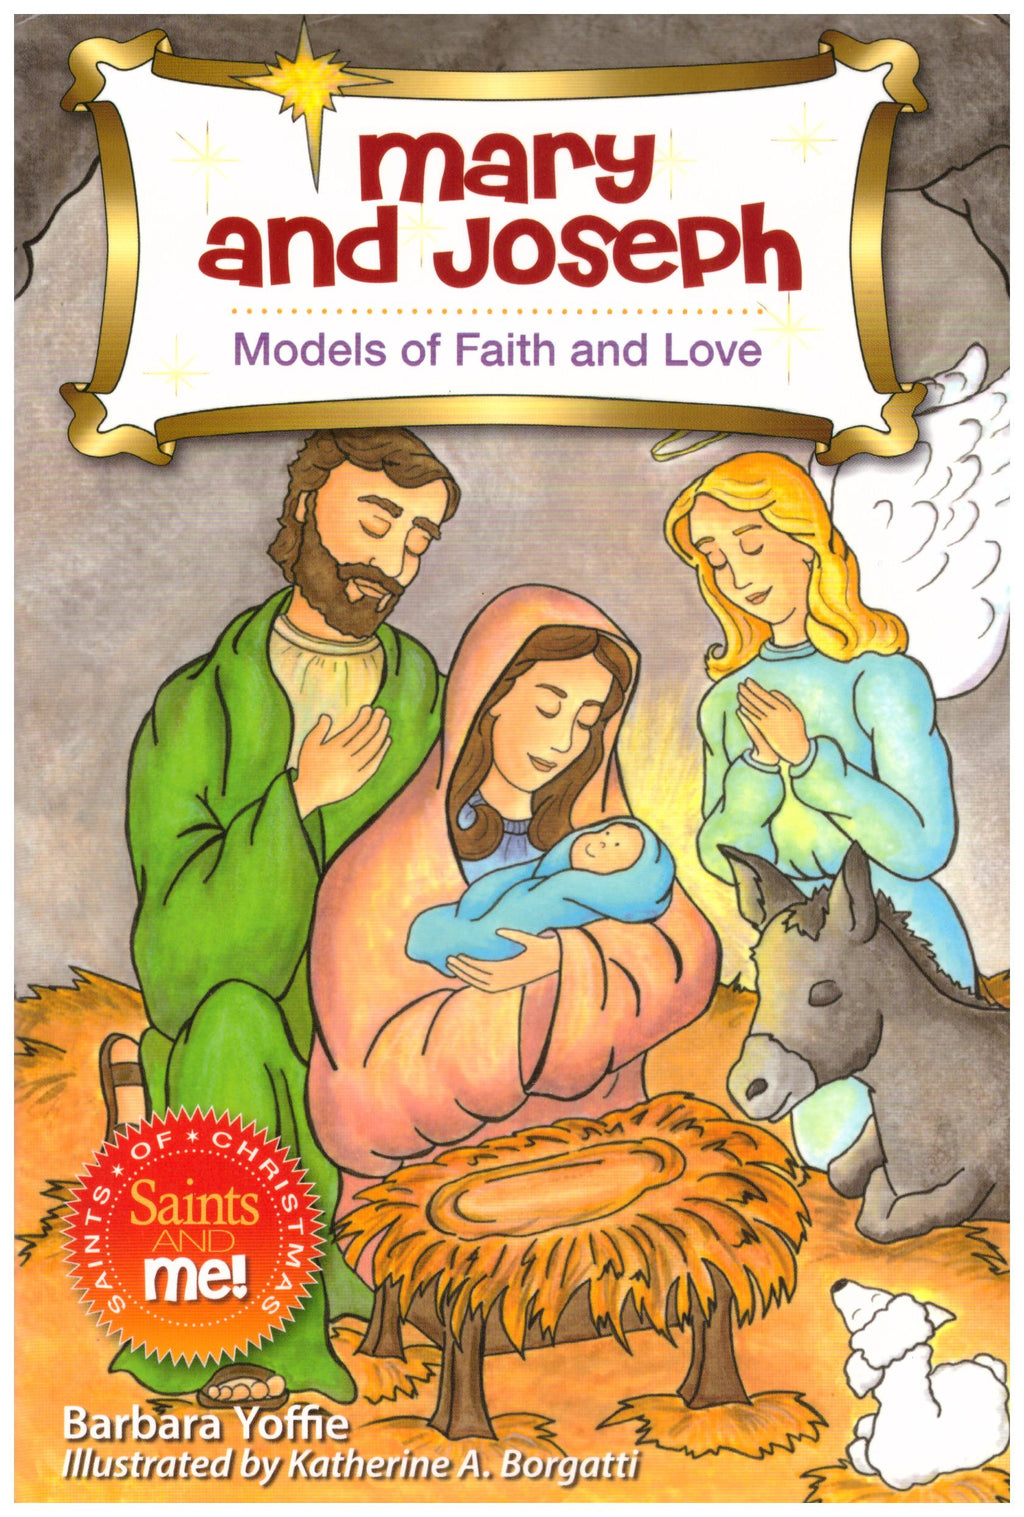 MARY AND JOSEPH MODELS OF